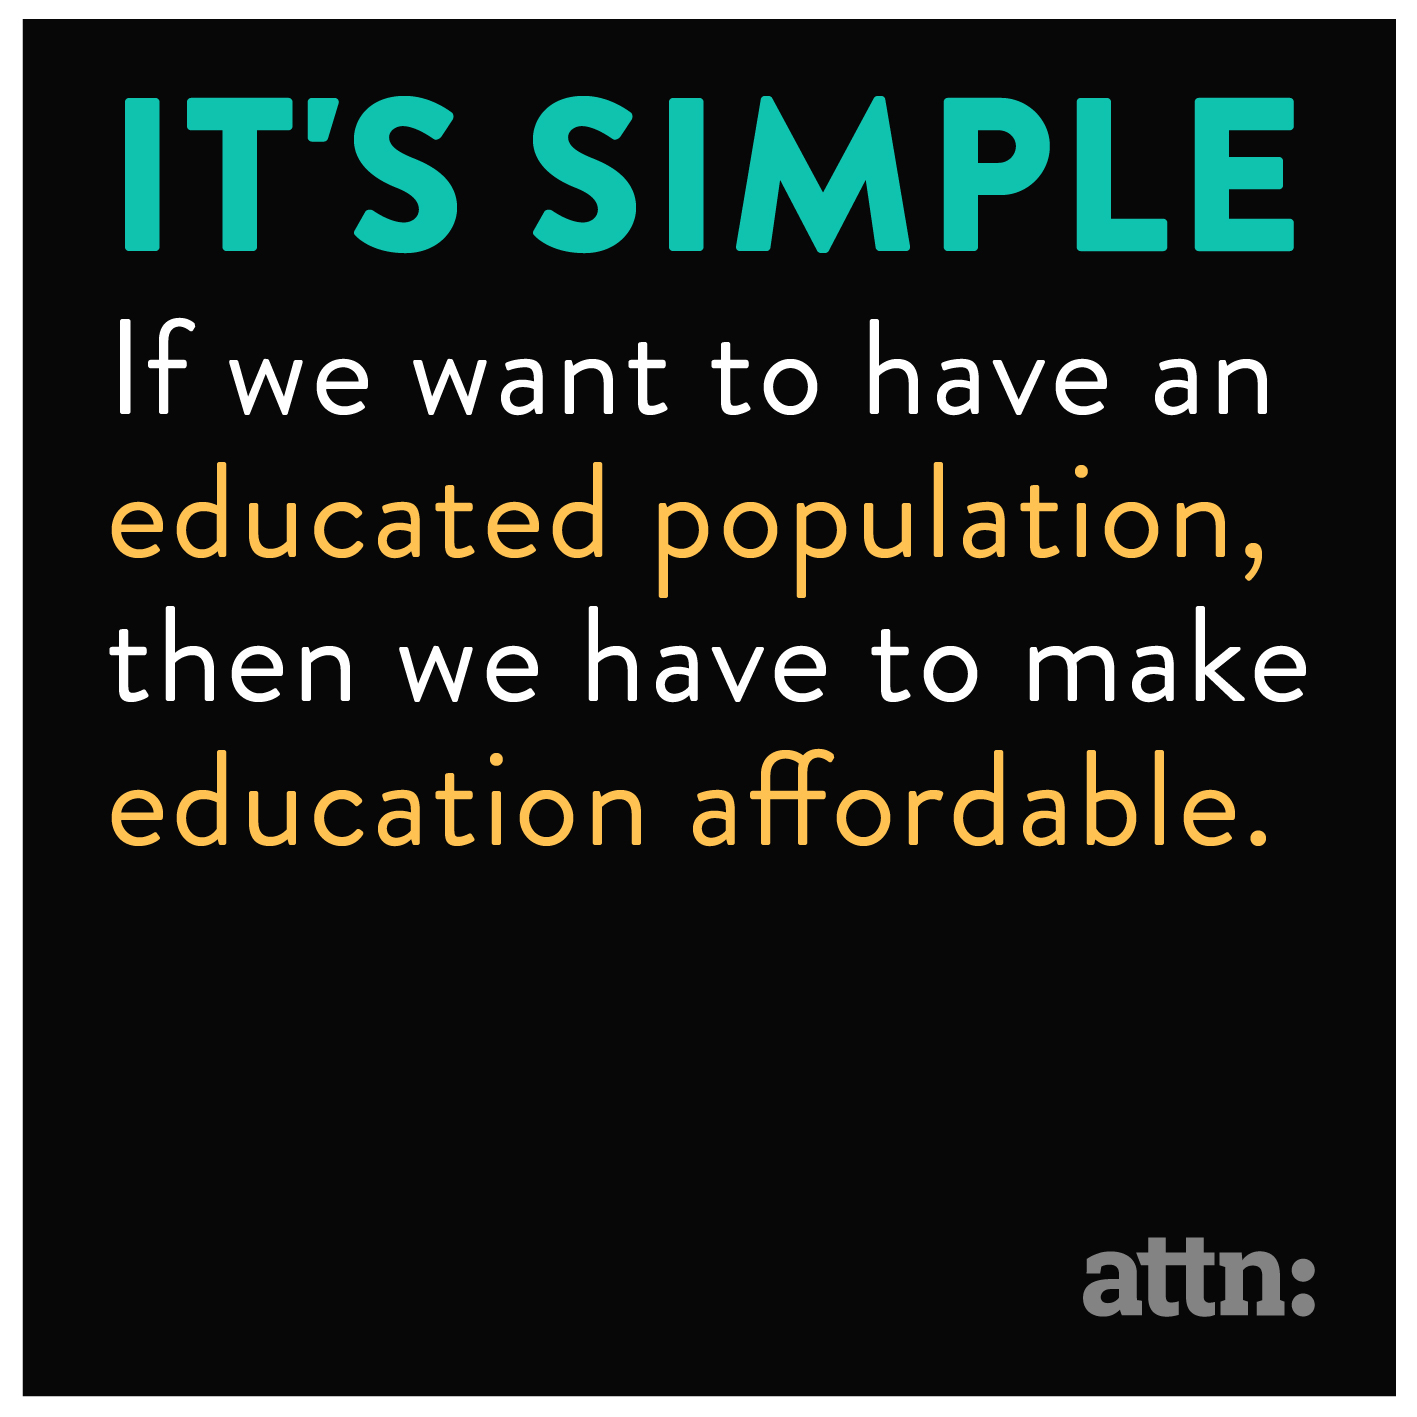 Education should be more affordable.